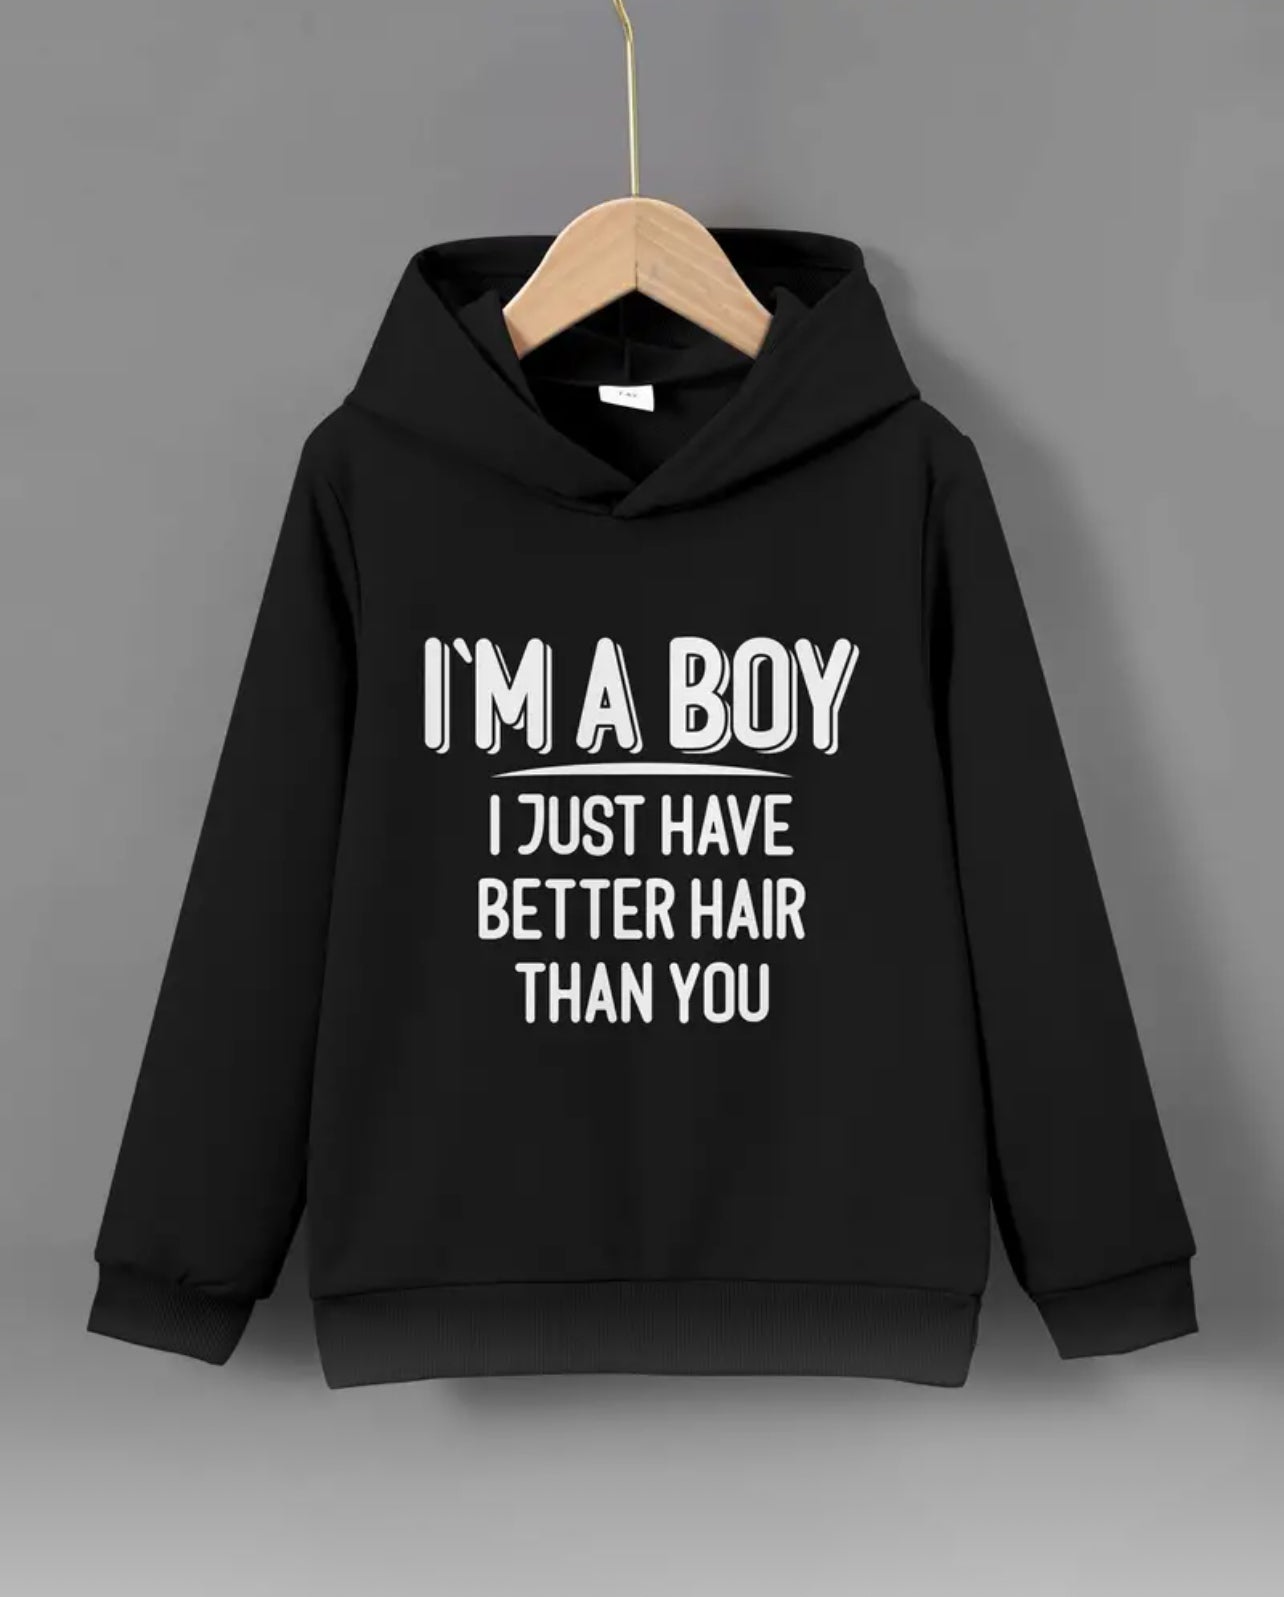 I'M A BOY I JUST HAVE BETTER HAIR THAN YOU , Cozy Hoodie - Keep Him Warm And Stylish